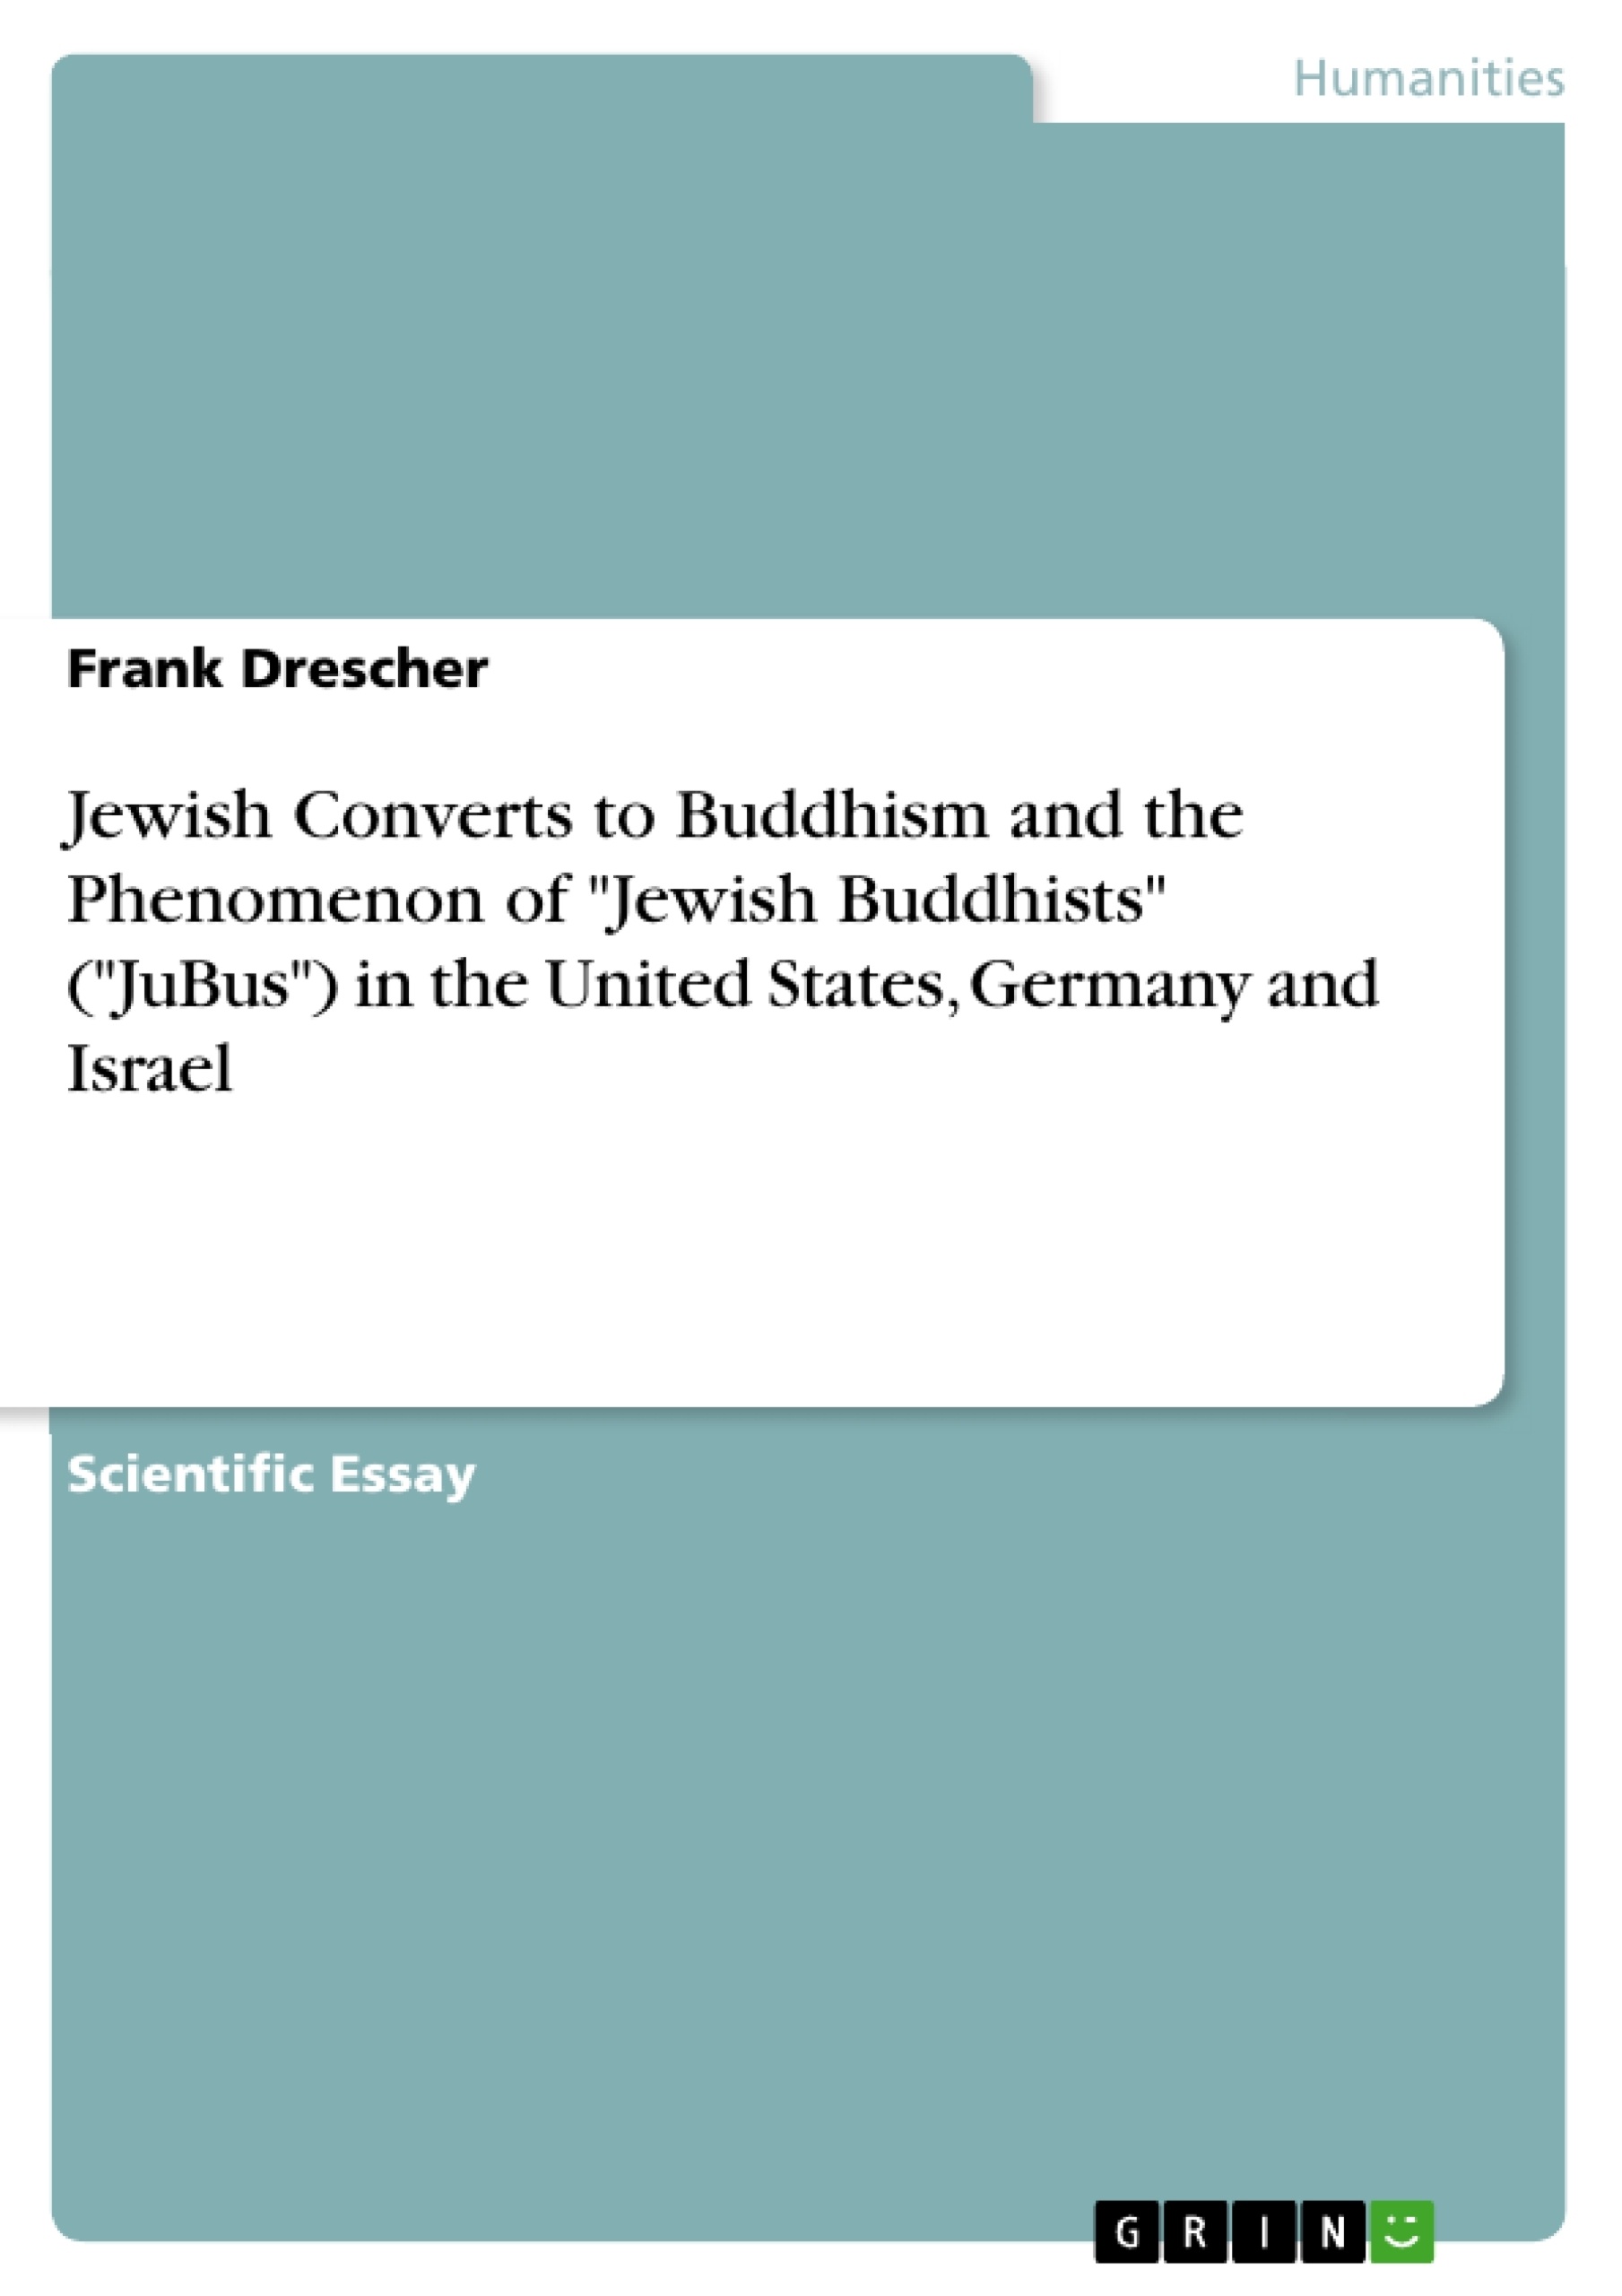 Título: Jewish Converts to Buddhism and the Phenomenon of "Jewish Buddhists" ("JuBus") in the United States, Germany and Israel